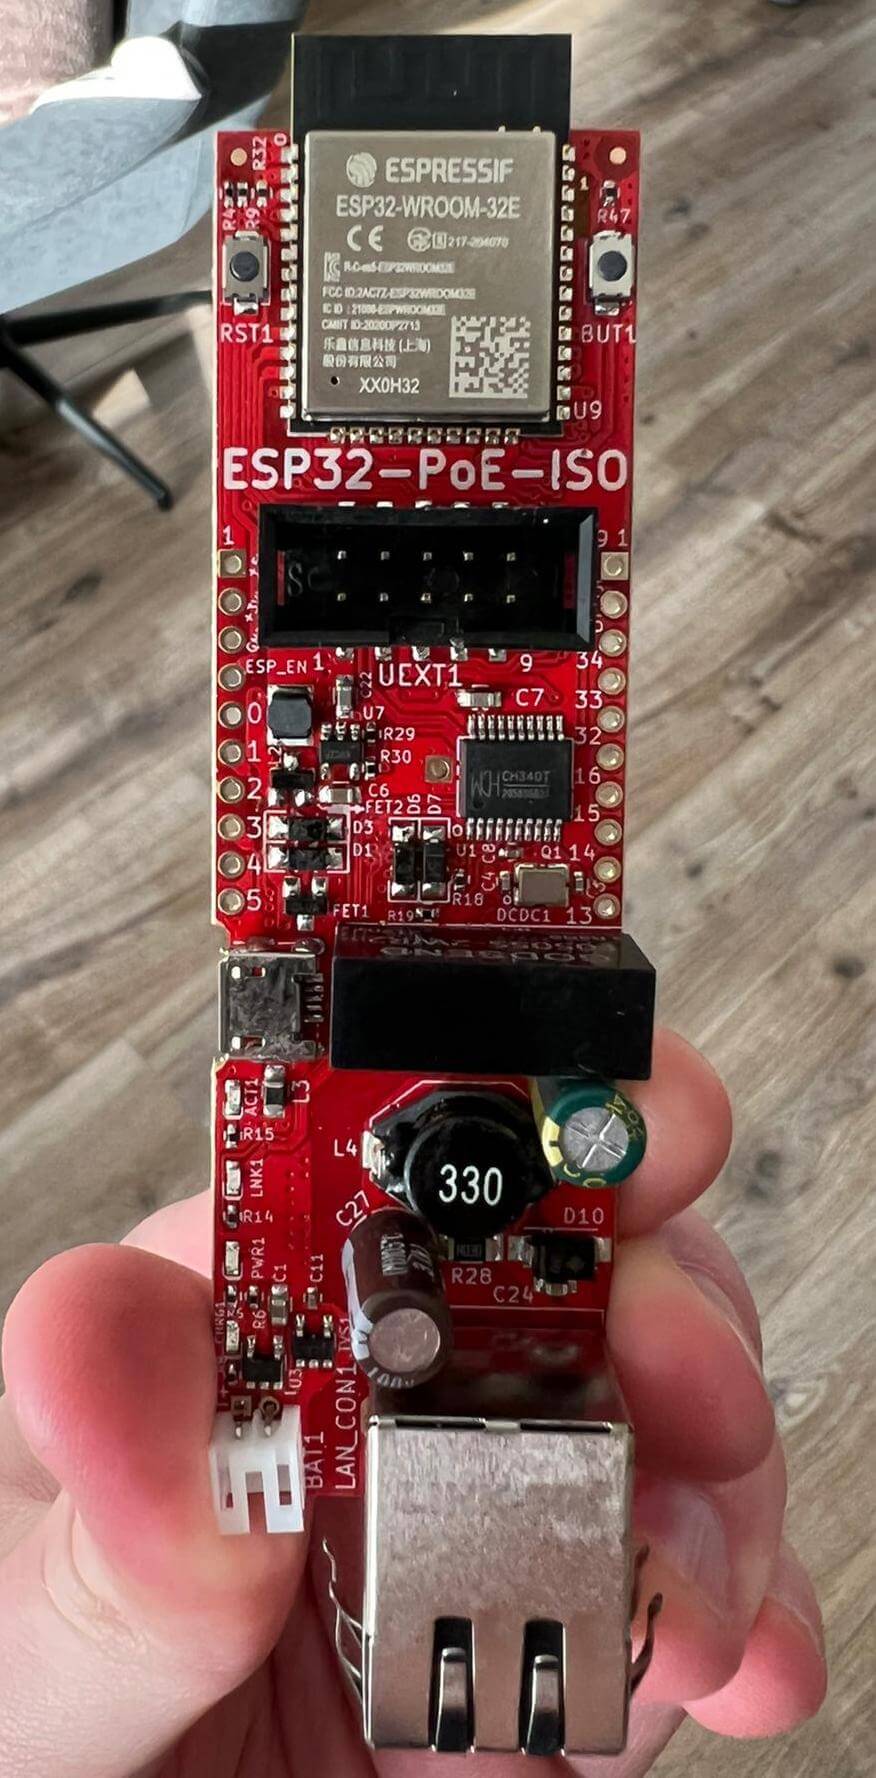 Olimex ESP32 devboard with power-over-ethernet capabilities